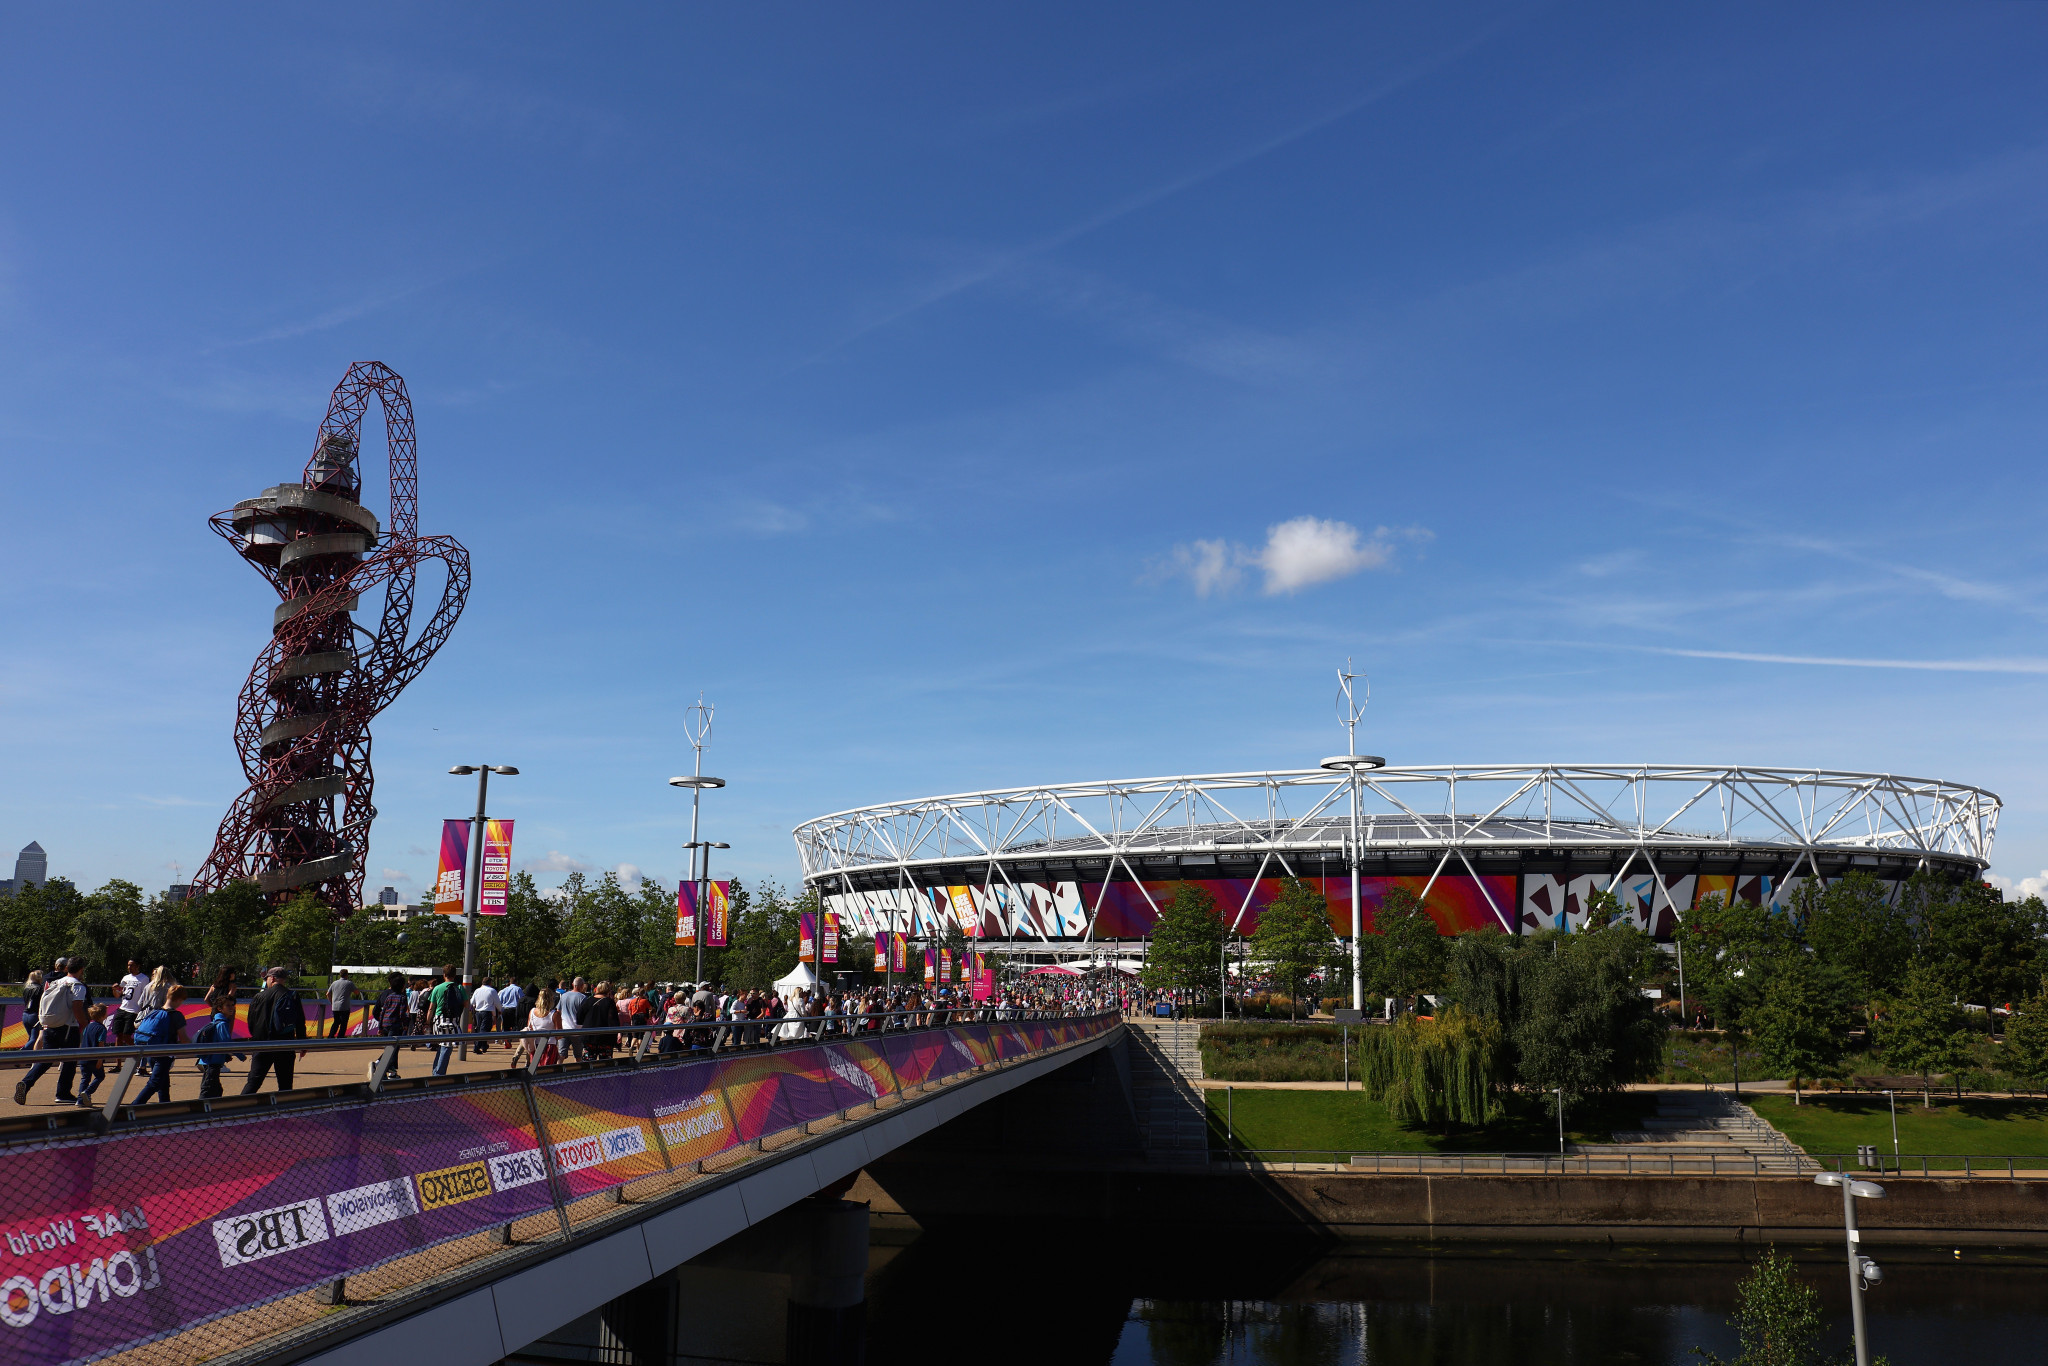 Garden to honour COVID-19 victims to be created at London 2012's Olympic Park